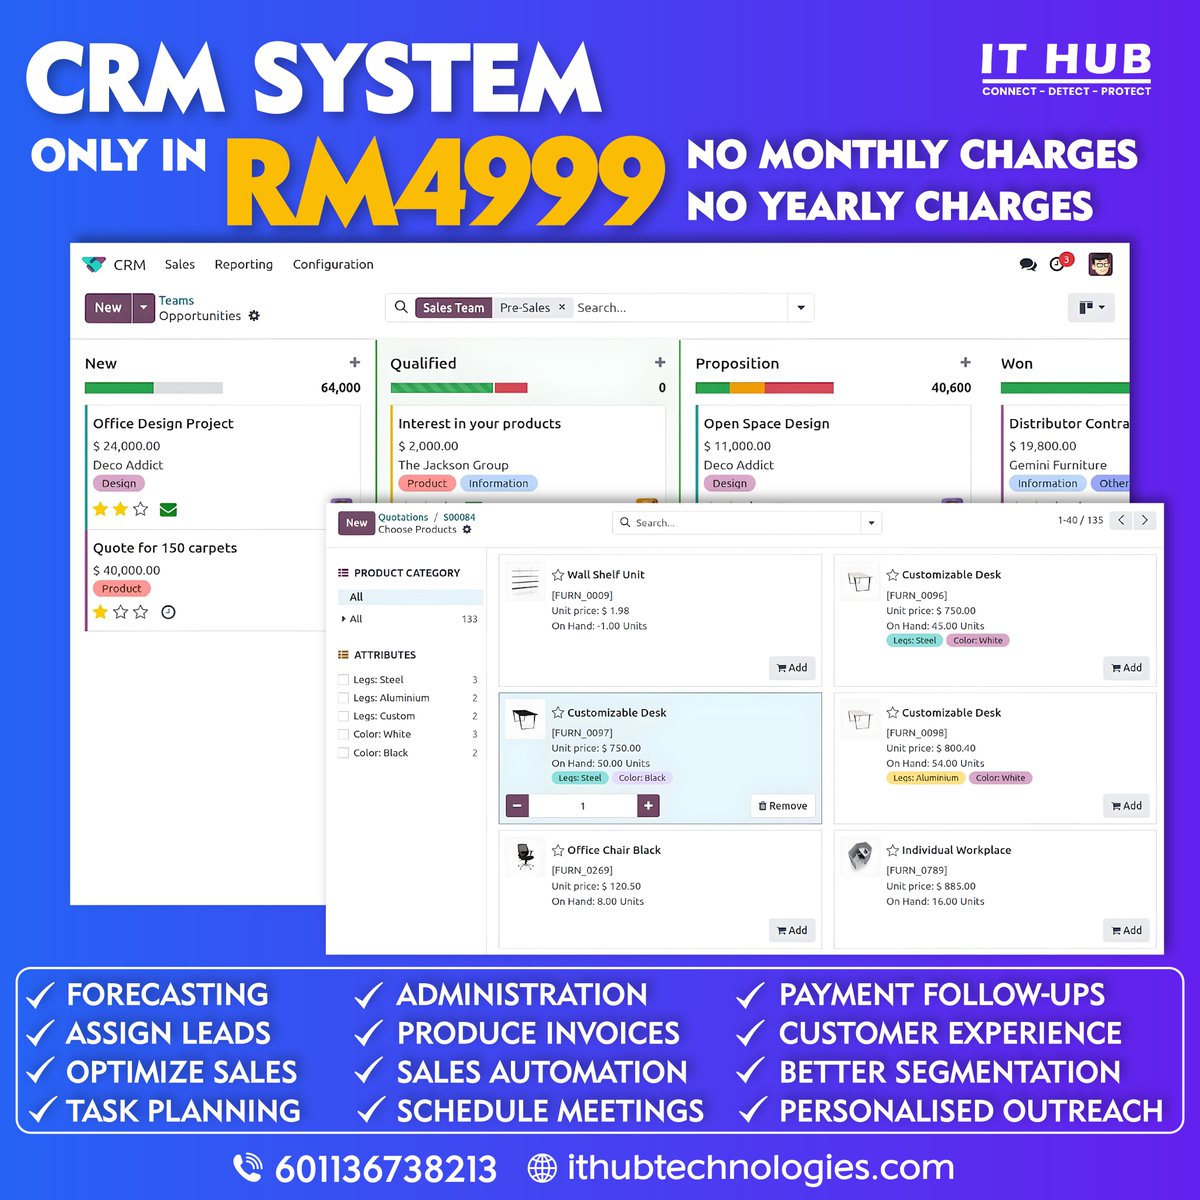 With CRM system never miss a deal, control your sales pipeline, manage leads and track sales task.
Contact Us: wa.me/message/NXCYHI…
#CRM #crmsystem #crmsoftware #crmsoftwaresolutions #crmintegration #leadsmanagement #invoicesoftware #Salesrep #salesalesale #SalesAutomation